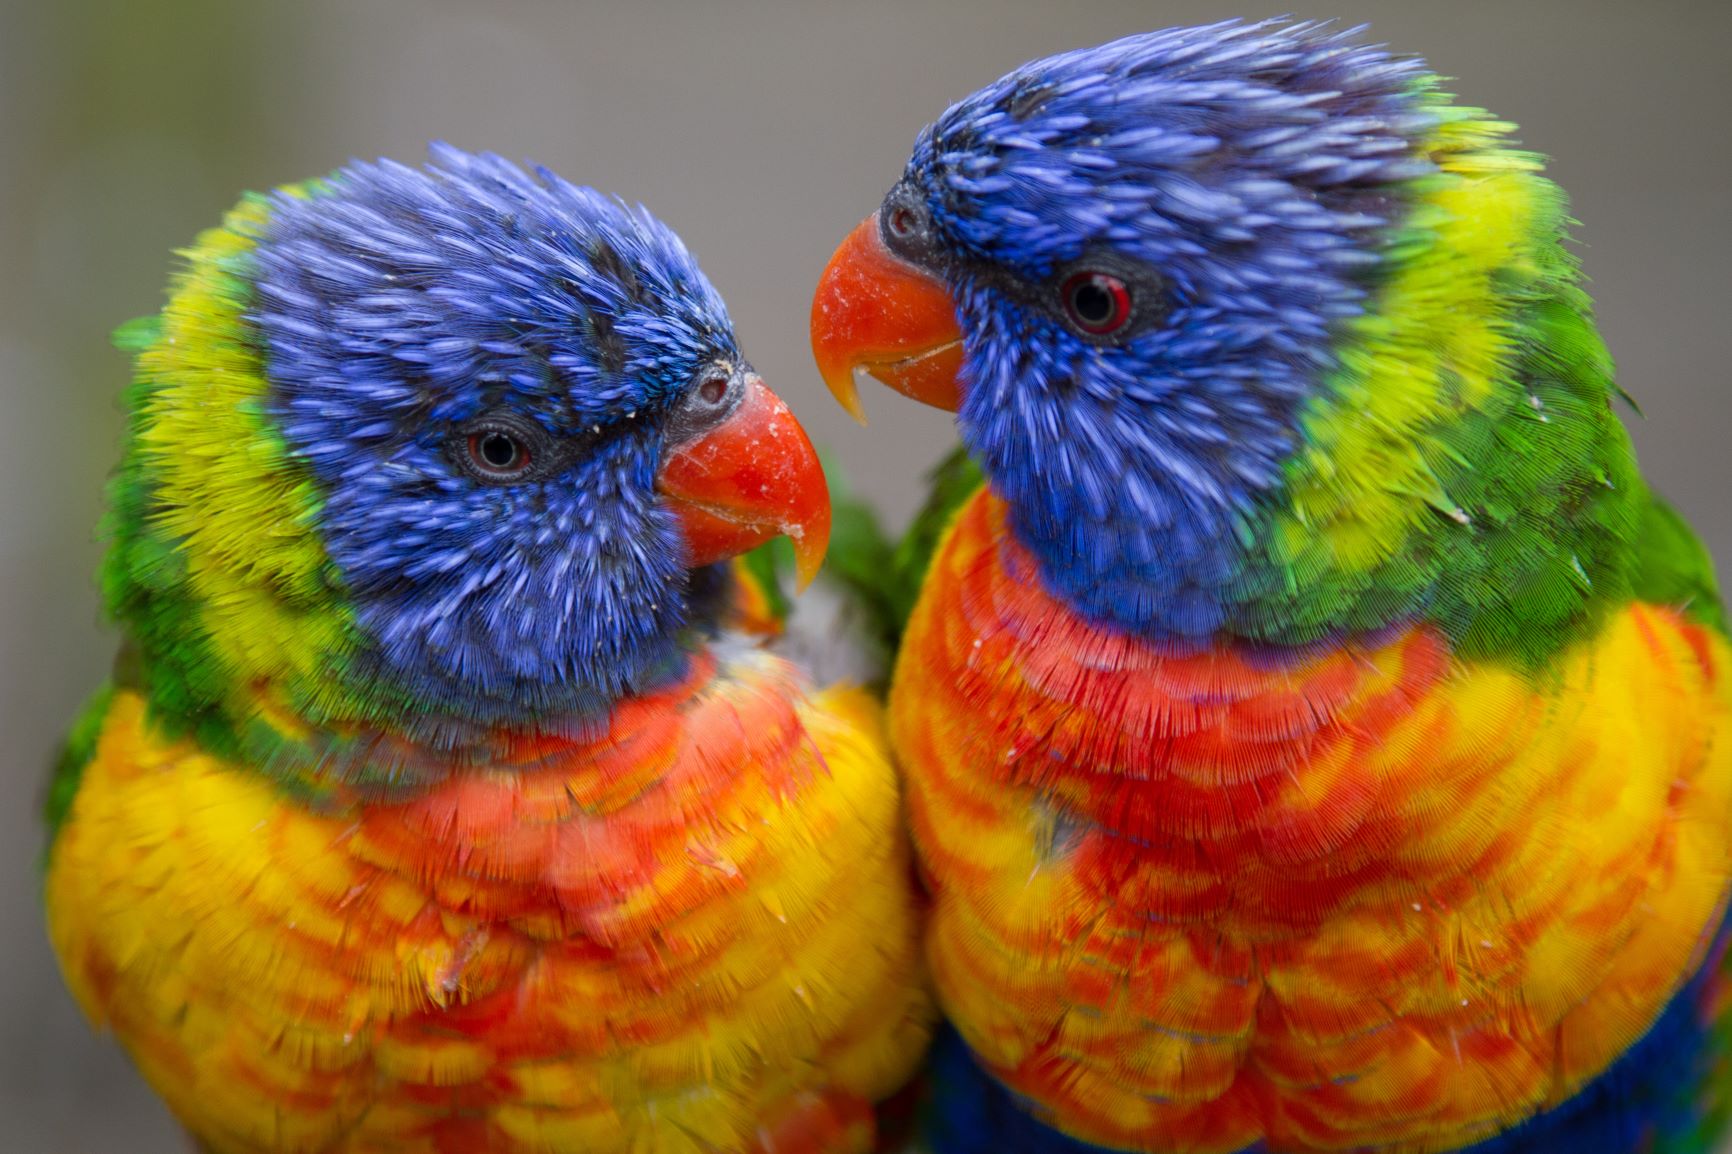 Two Rainbow Lorikeets looking at each other